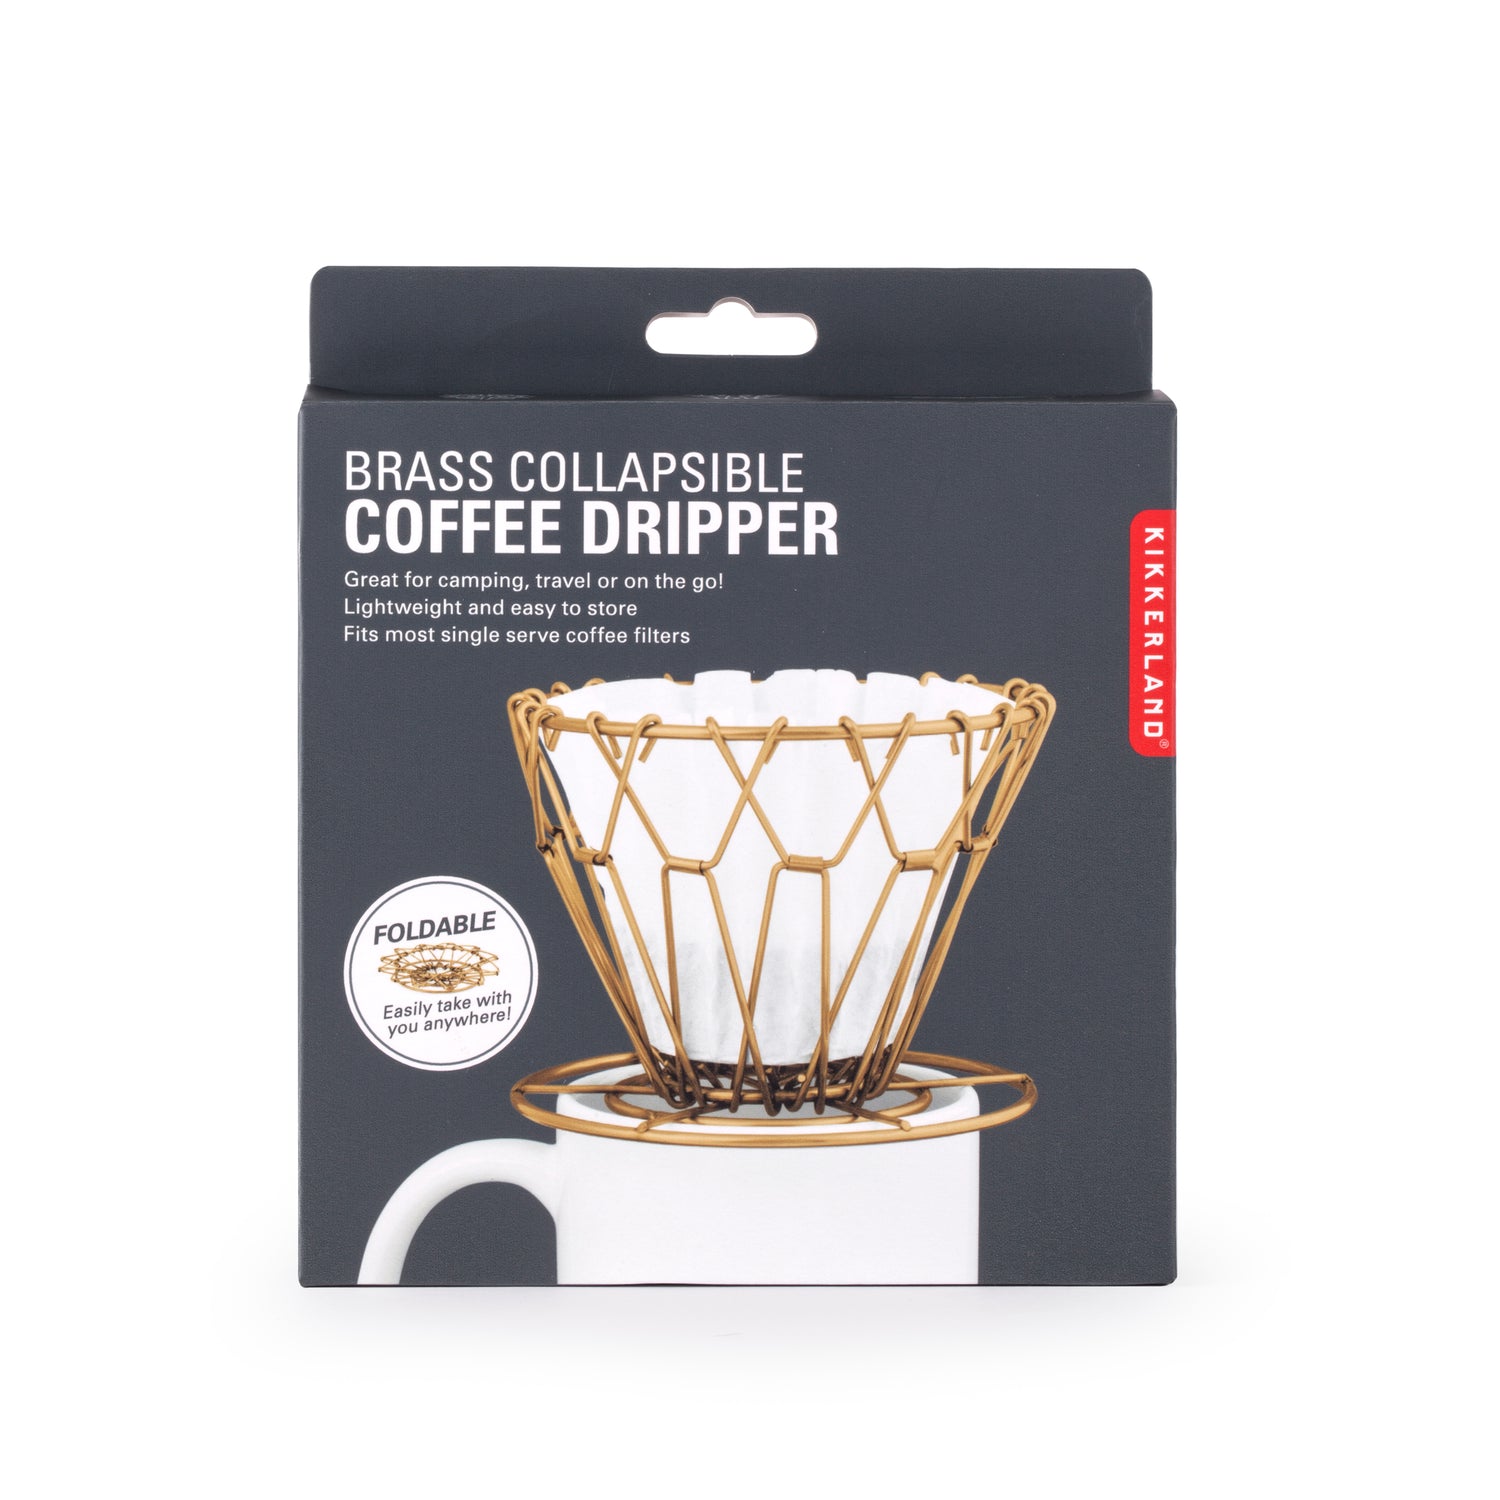 Brass Collapsible Coffee Dripper